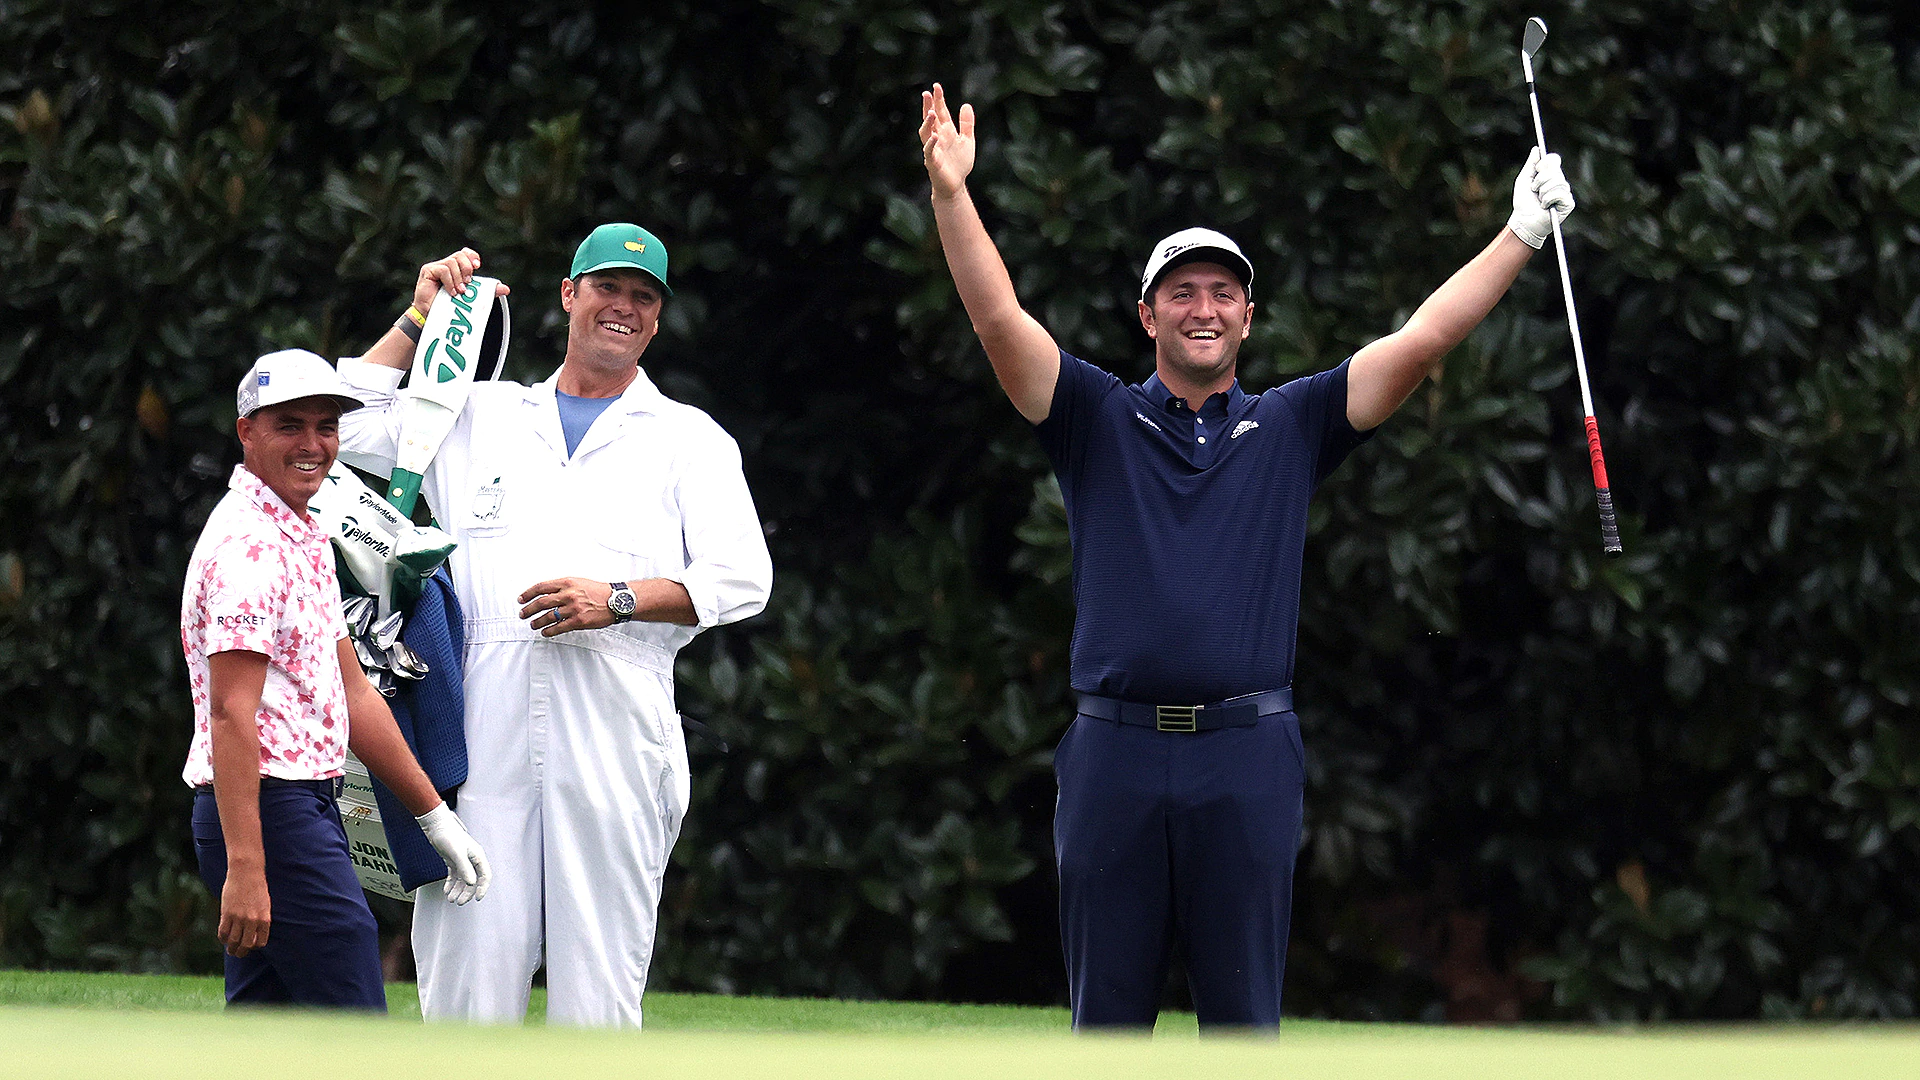 Watch: Jon Rahm, on his birthday, skips ball across pond, into hole at No. 16 at 2020 Masters